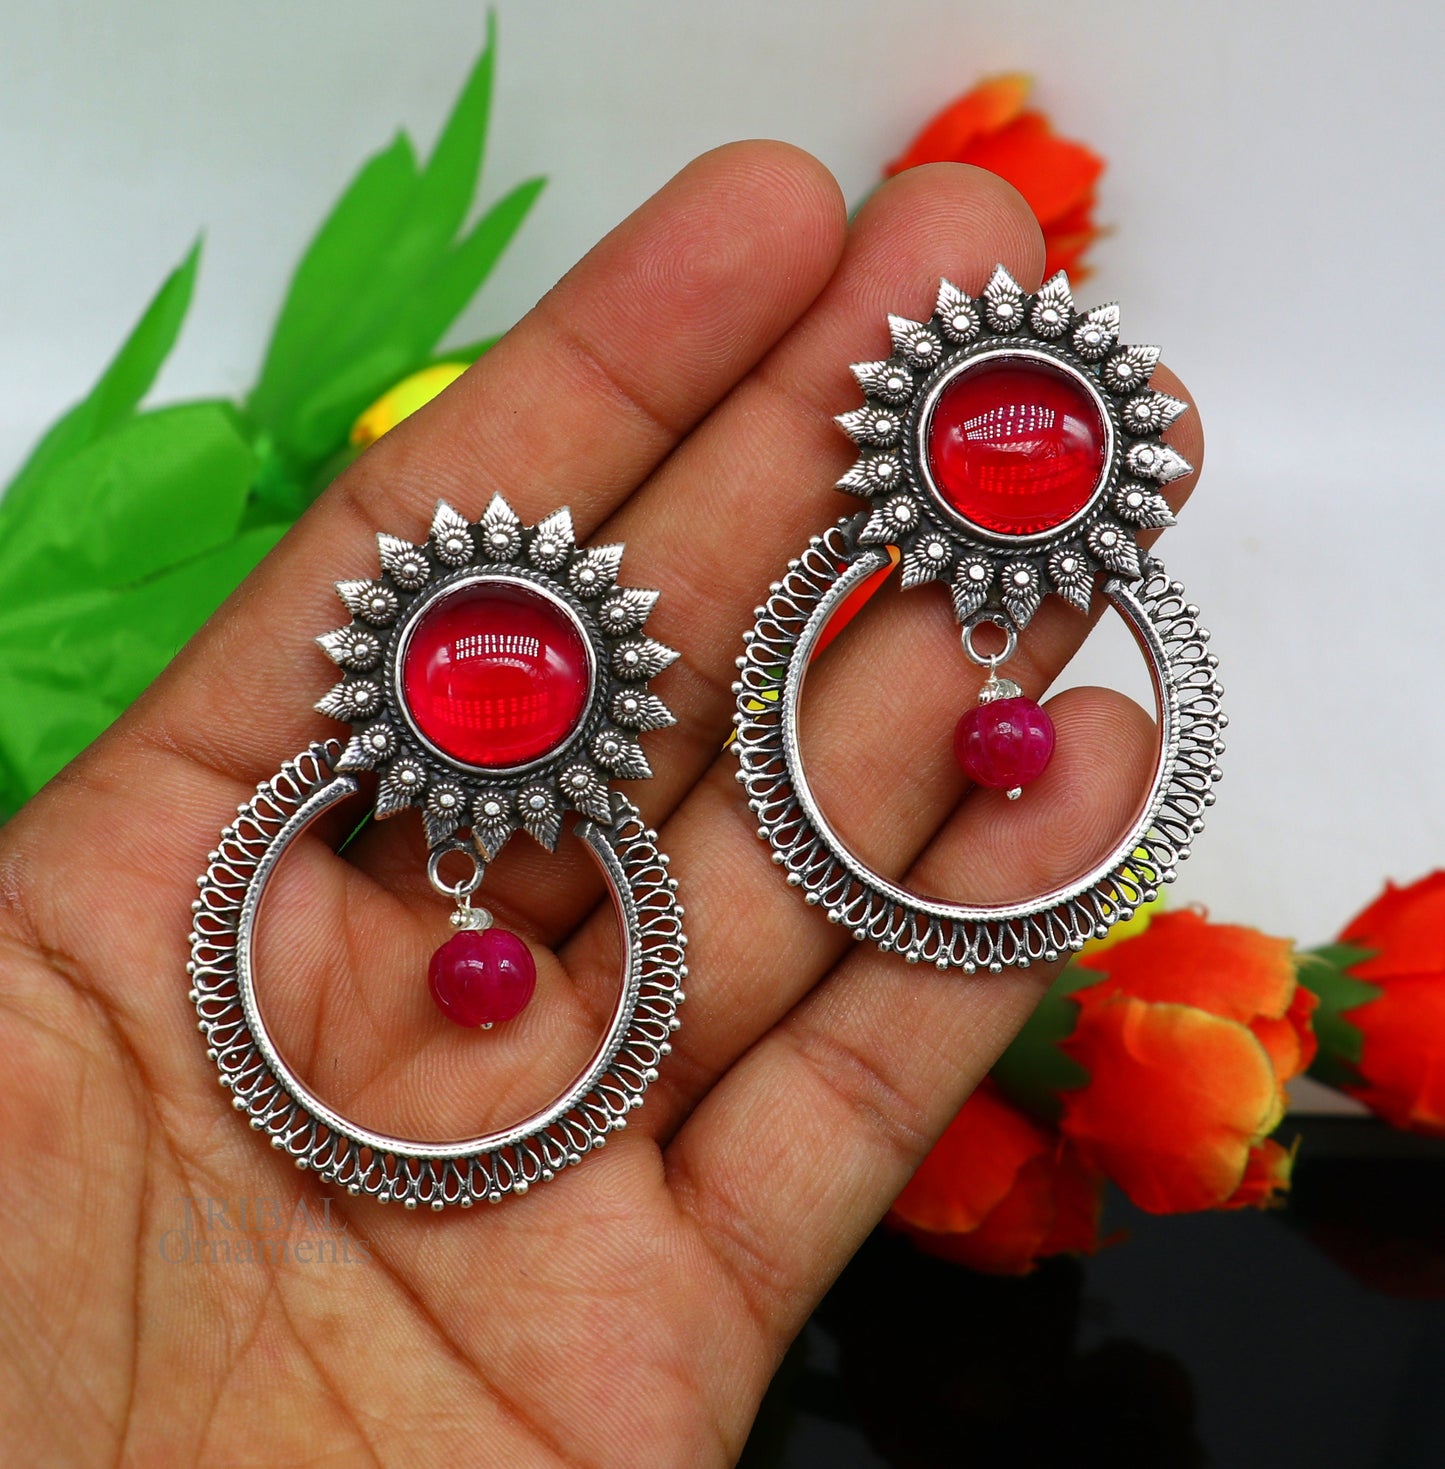 925 sterling silver traditional style handmade fabulous red glossy stone Stud earrings tribal ethnic style earring ear1150 - TRIBAL ORNAMENTS